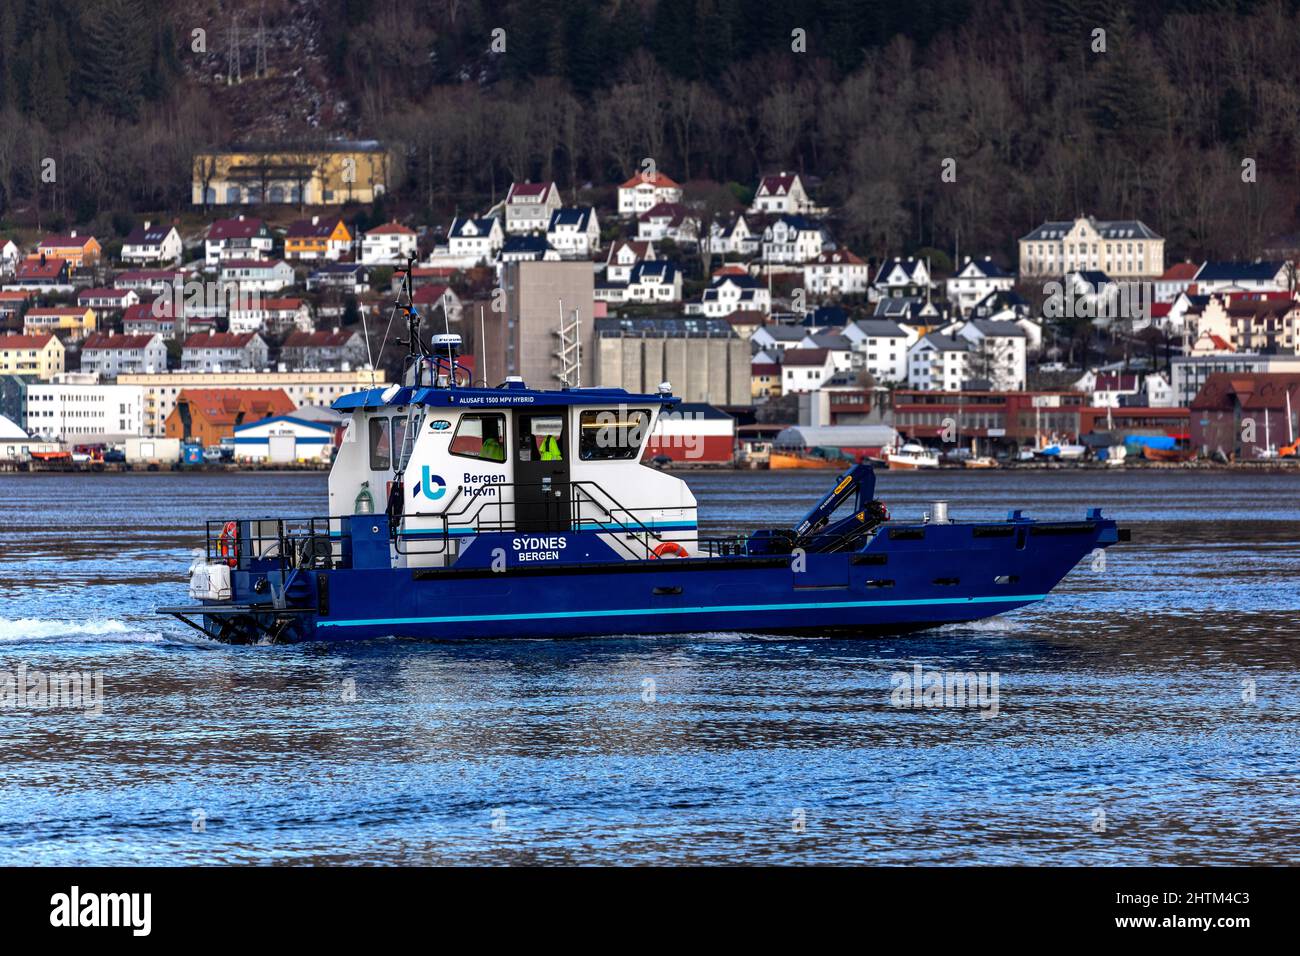 MB 'Sydnes', Bergen port authority's maintenance and service boat,  in port of Bergen, Norway Stock Photo